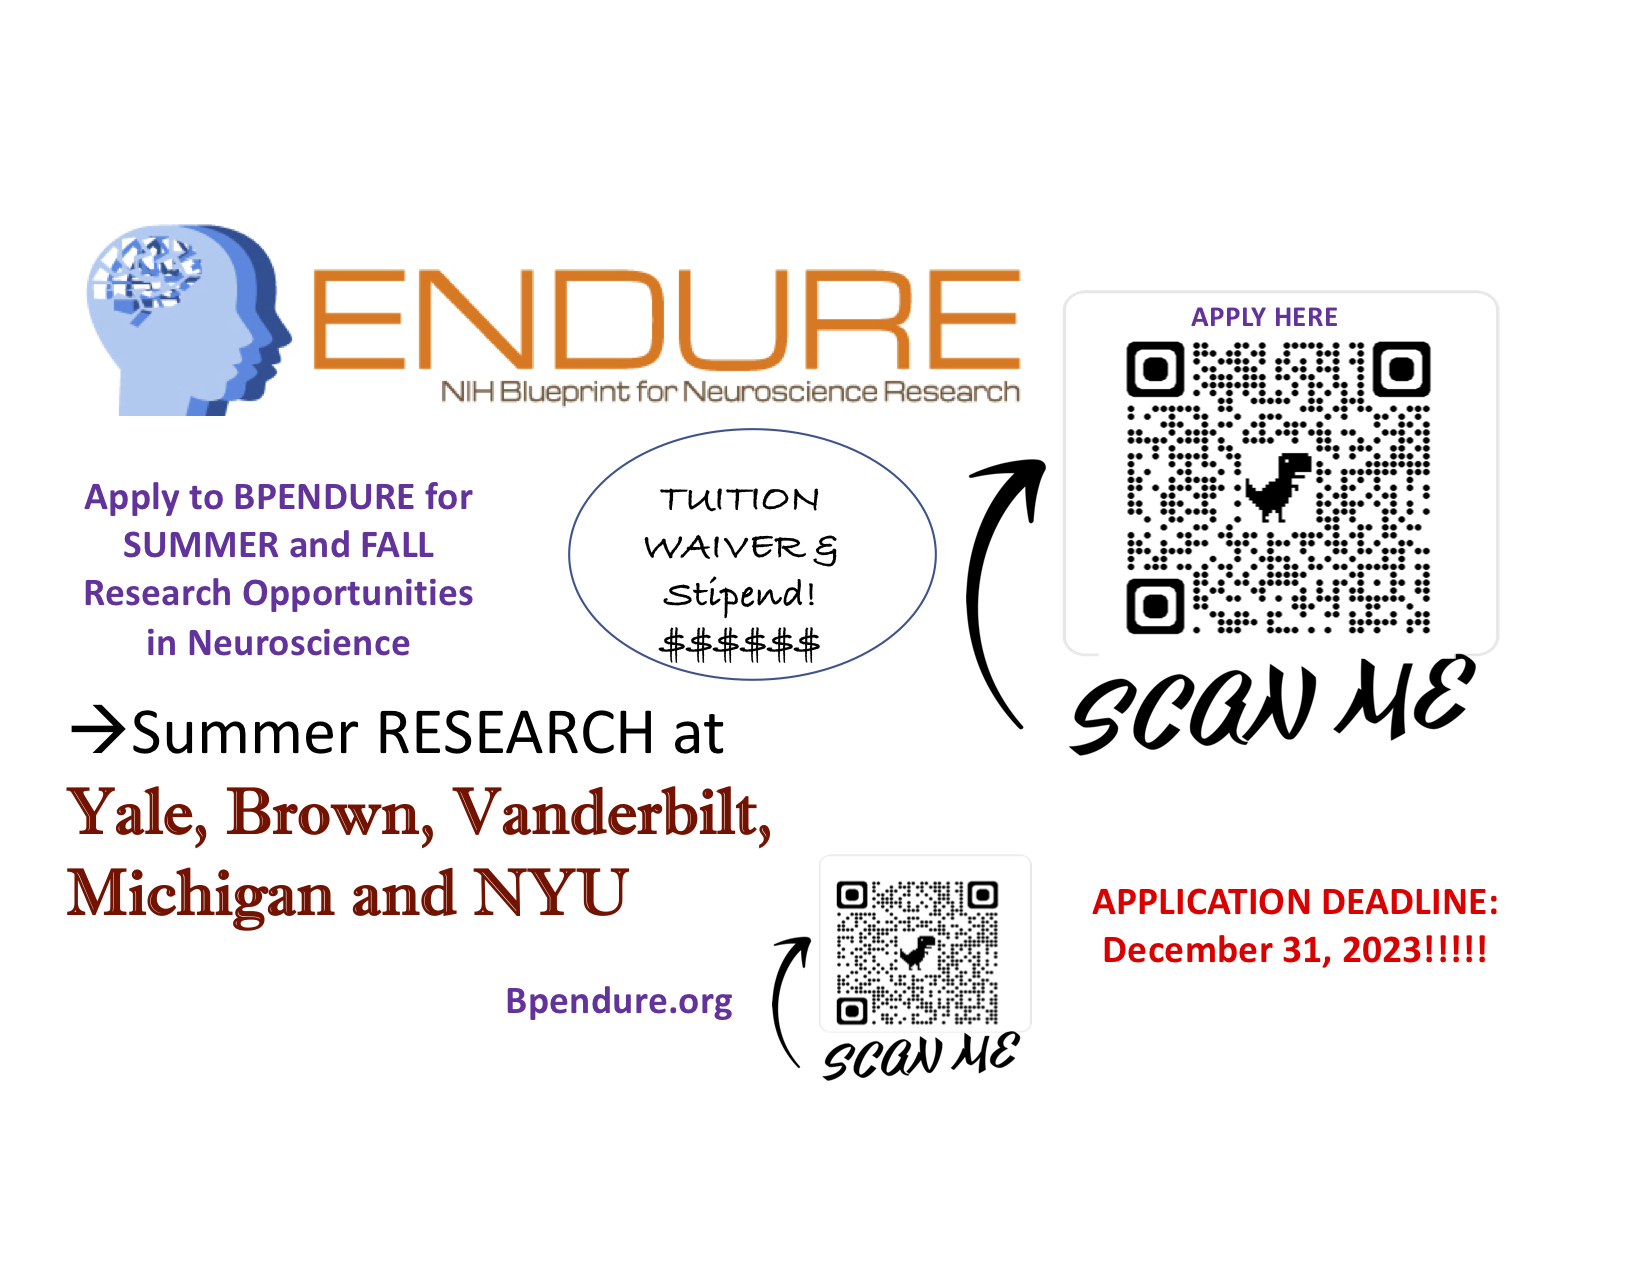 BPEndure NIH Program is Accepting New Applications!